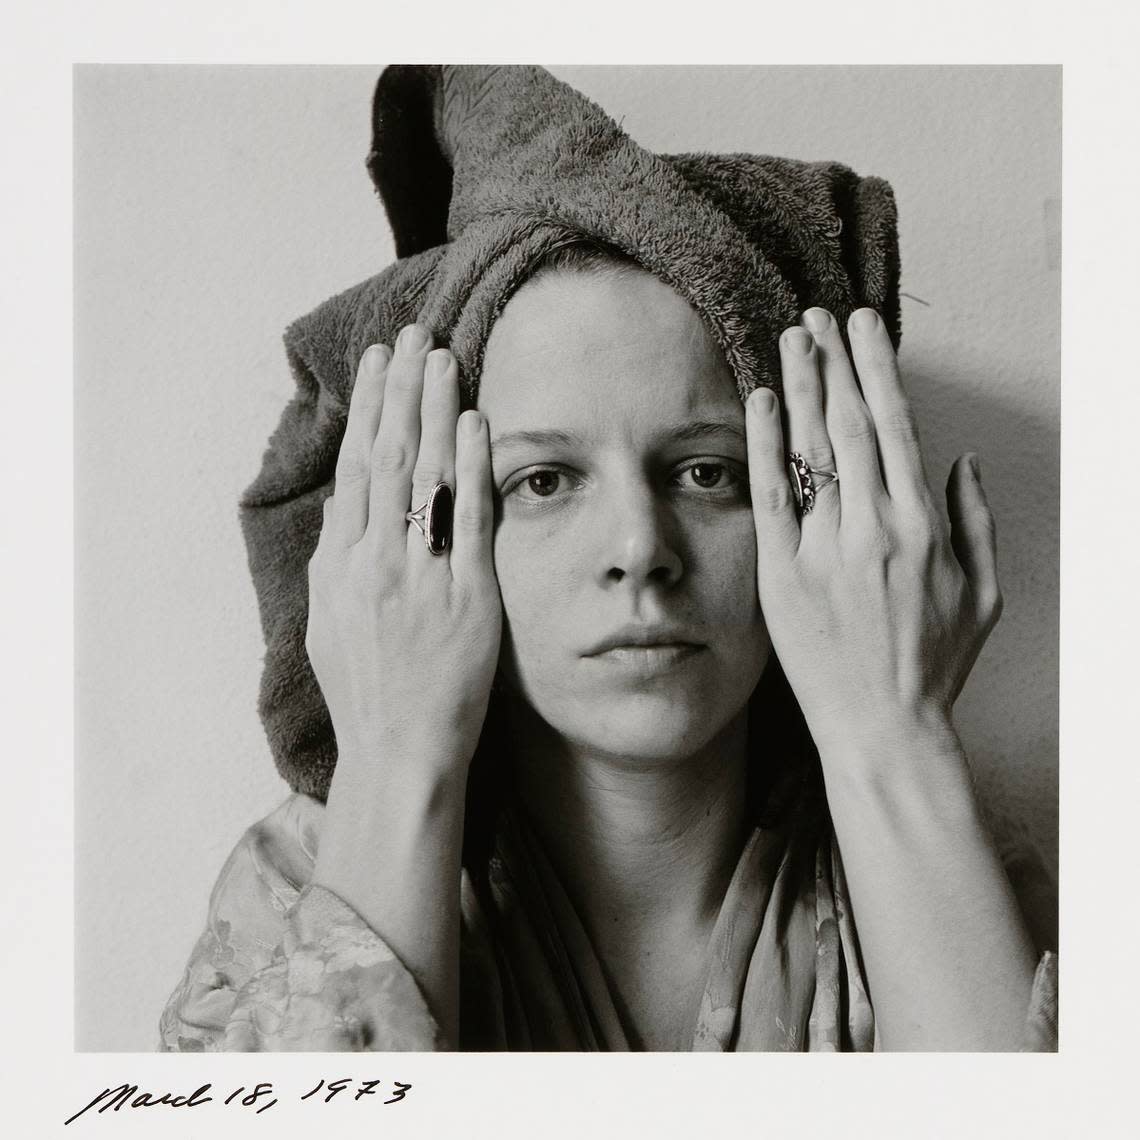 “‘To Prove that I Exist’: Melissa Shook’s Daily Self-Portraits, 1972-1973” will run March 9-Aug. 4 at the Nelson-Atkins Museum of Art. Melissa Shook/Nelson-Atkins Museum of Art